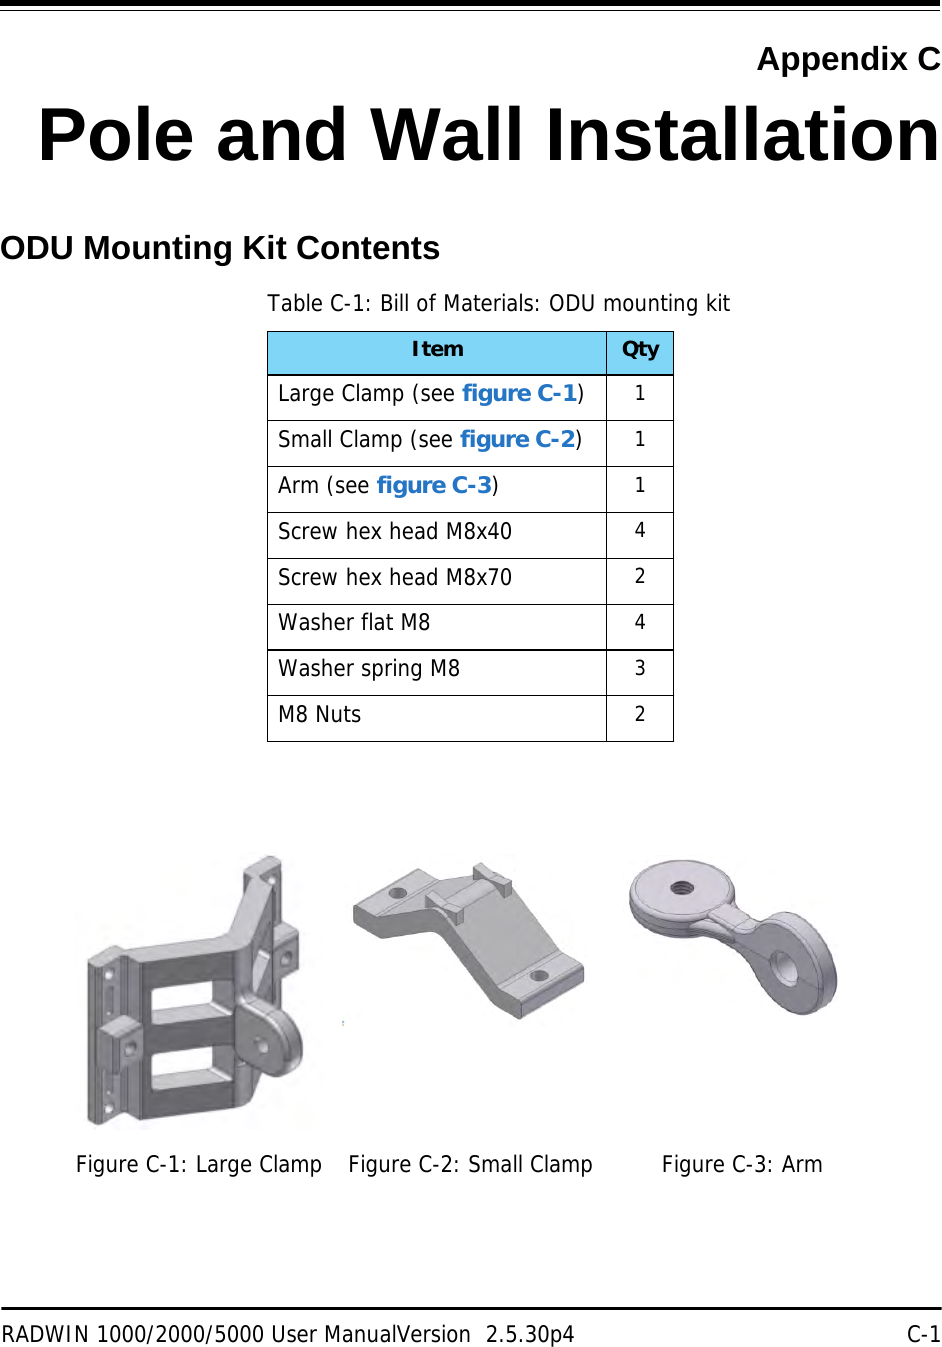 RADWIN 1000/2000/5000 User ManualVersion  2.5.30p4 C-1Appendix CPole and Wall InstallationODU Mounting Kit ContentsTable C-1: Bill of Materials: ODU mounting kitItem QtyLarge Clamp (see figure C-1)1Small Clamp (see figure C-2)1Arm (see figure C-3)1Screw hex head M8x40 4Screw hex head M8x70 2Washer flat M8 4Washer spring M8 3M8 Nuts 2Figure C-1: Large Clamp Figure C-2: Small Clamp Figure C-3: Arm